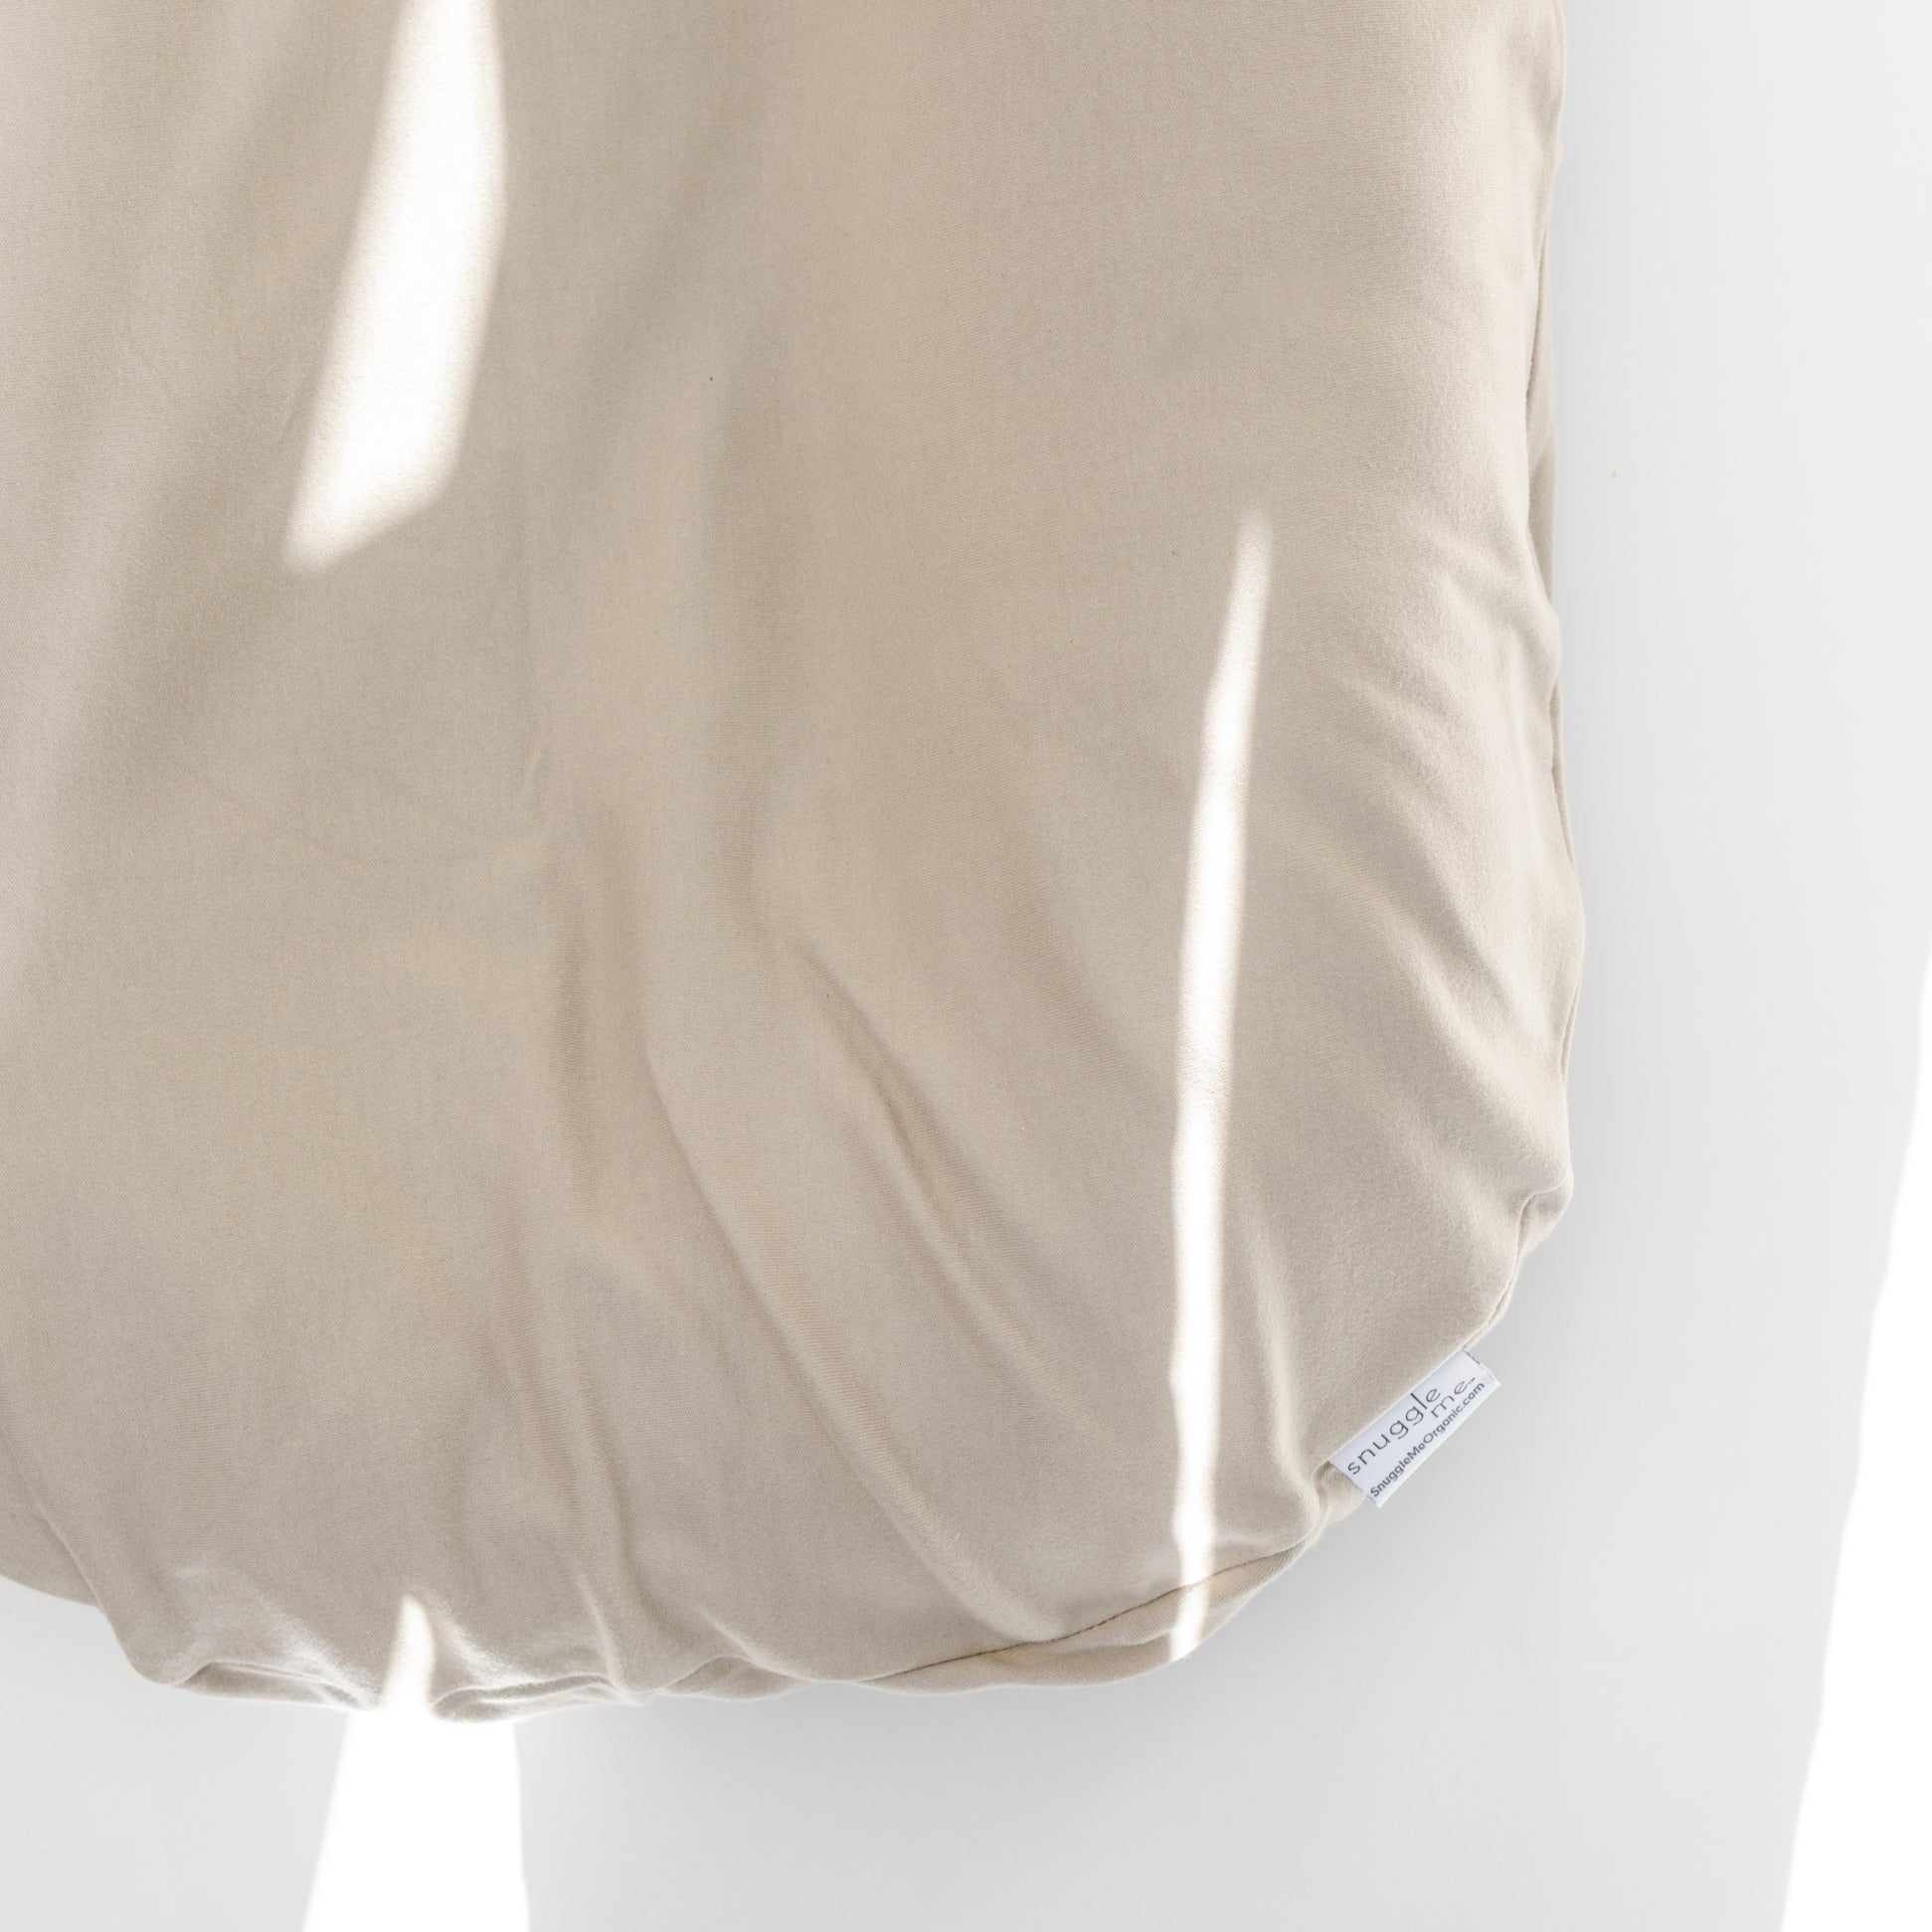 A close up image of The Snuggle Me® Lounger on a white surface.